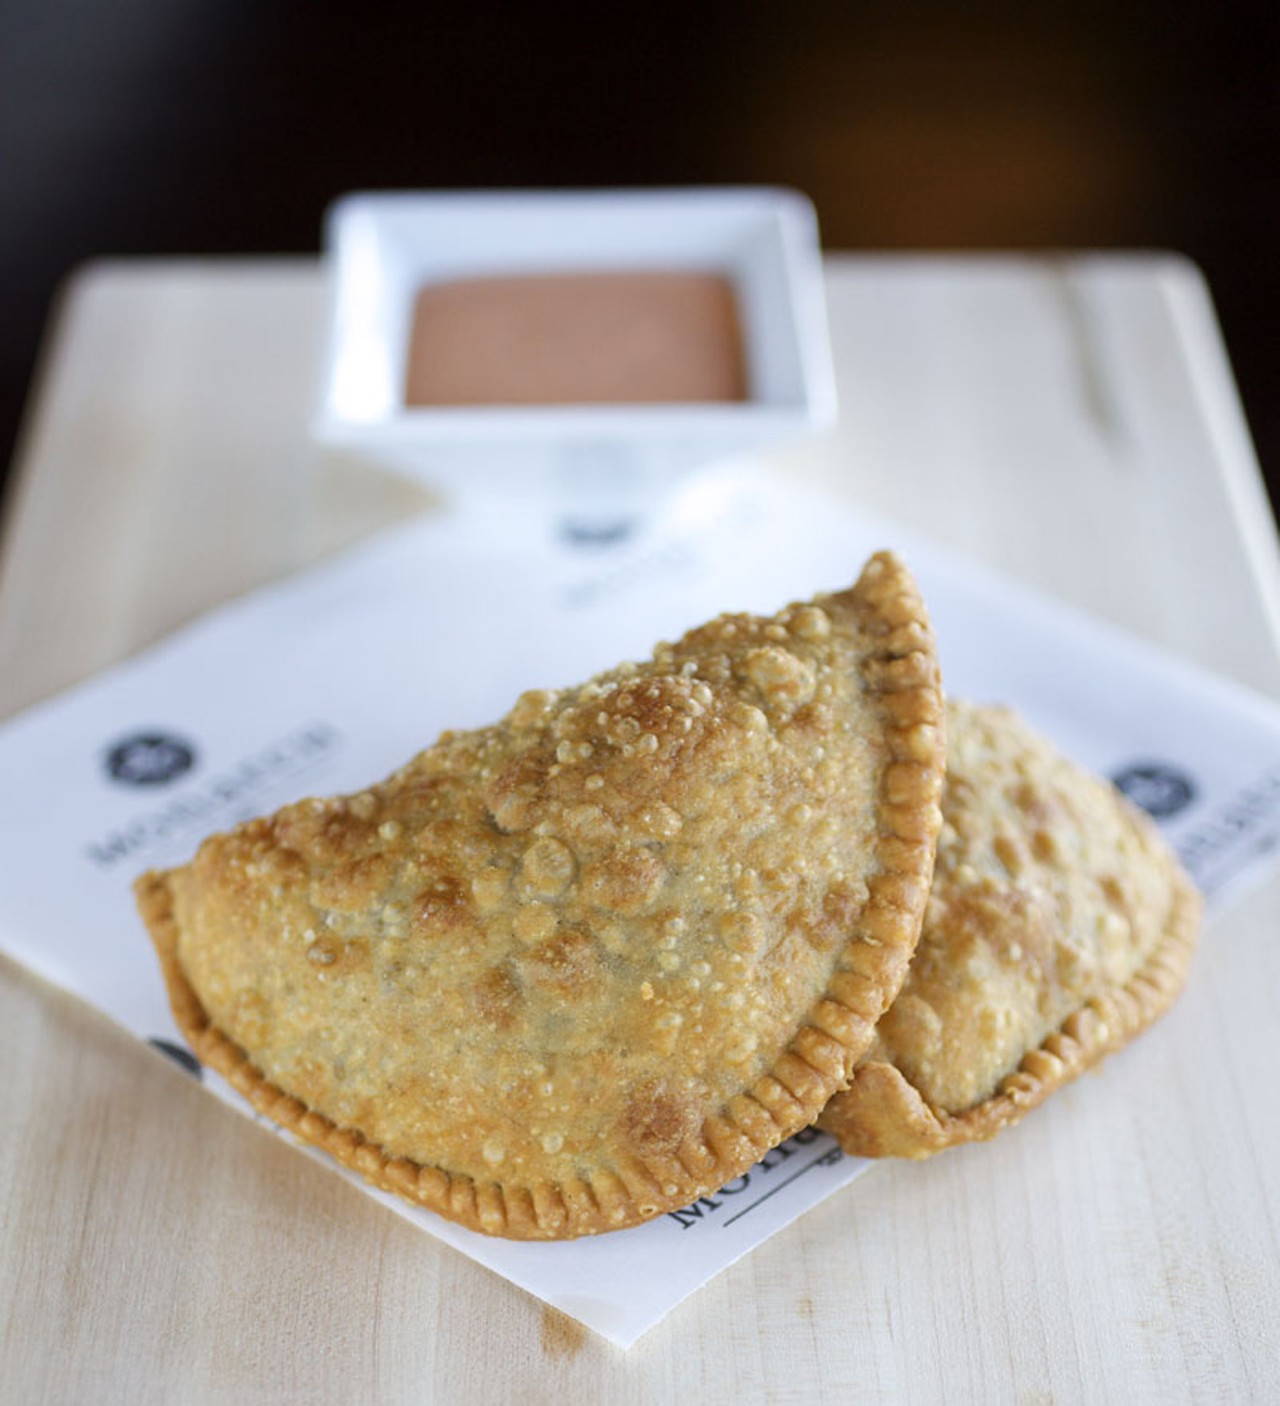 Miniature Natchitoches Meat Pies - spicy beef turnovers served with a special sauce.